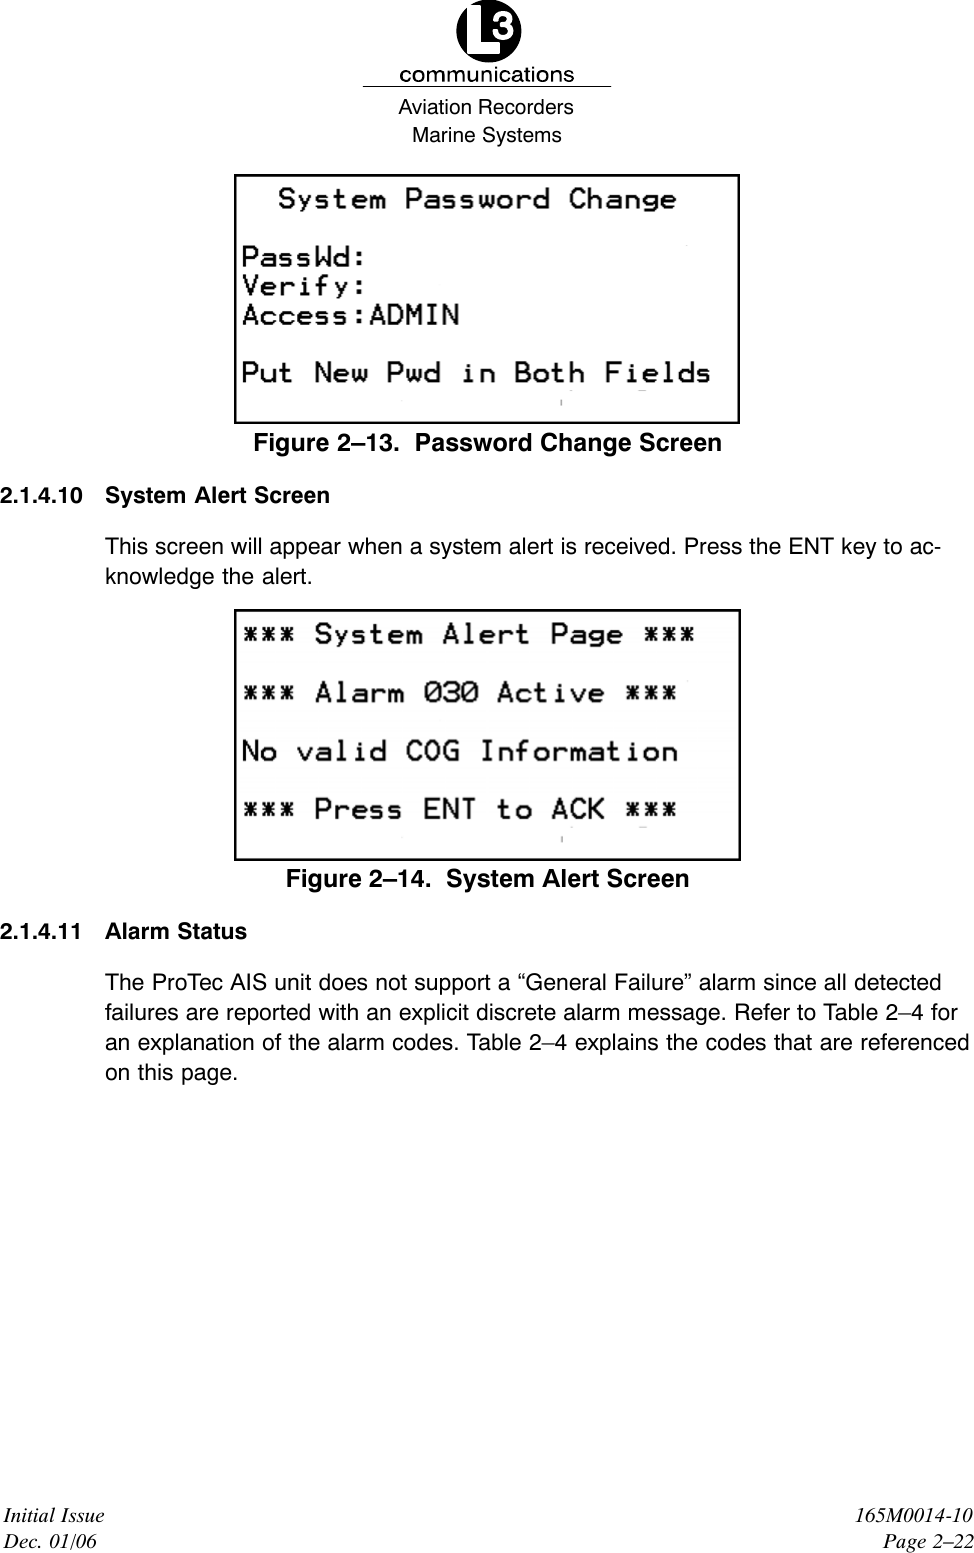 Marine SystemsAviation RecordersInitial IssueDec. 01/06165M0014-10Page 2–22Figure 2–13.  Password Change Screen2.1.4.10 System Alert ScreenThis screen will appear when a system alert is received. Press the ENT key to ac-knowledge the alert.Figure 2–14.  System Alert Screen2.1.4.11 Alarm StatusThe ProTec AIS unit does not support a “General Failure” alarm since all detectedfailures are reported with an explicit discrete alarm message. Refer to Table 2–4 foran explanation of the alarm codes. Table 2–4 explains the codes that are referencedon this page.